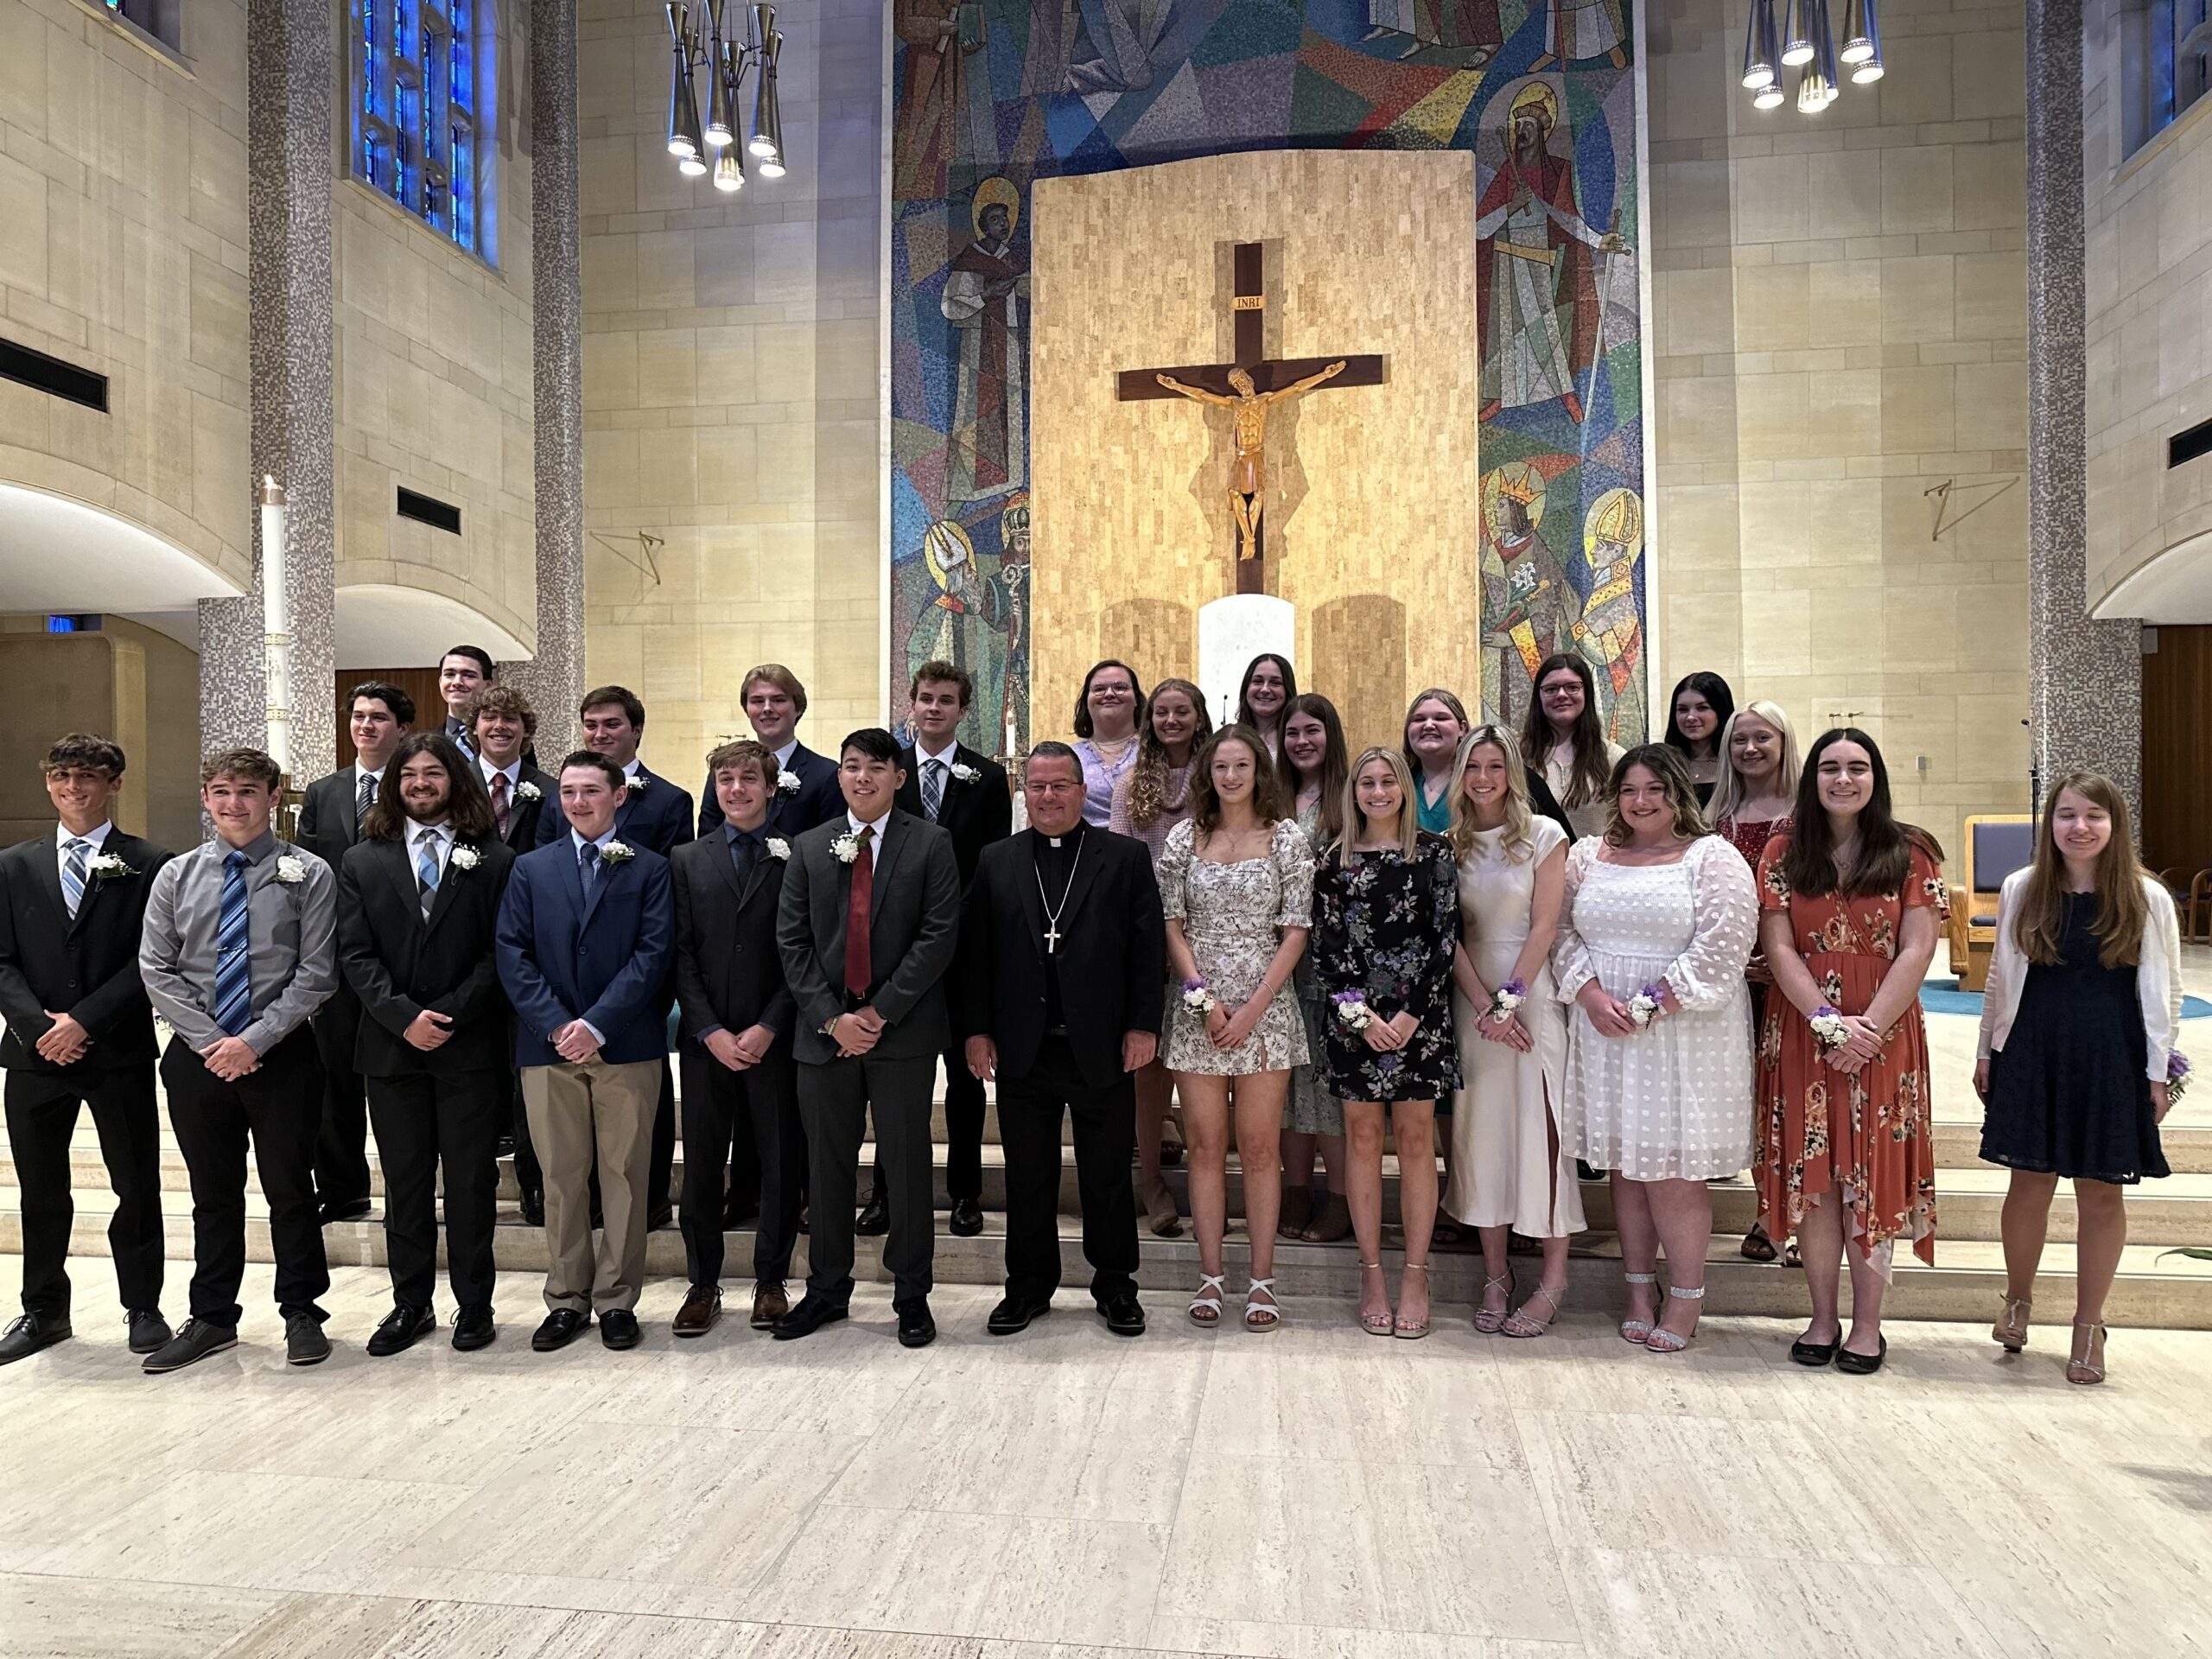 The Eagle of the Cross award recipients pose with the bishop in front of the altar at St. Columba Cathedral.